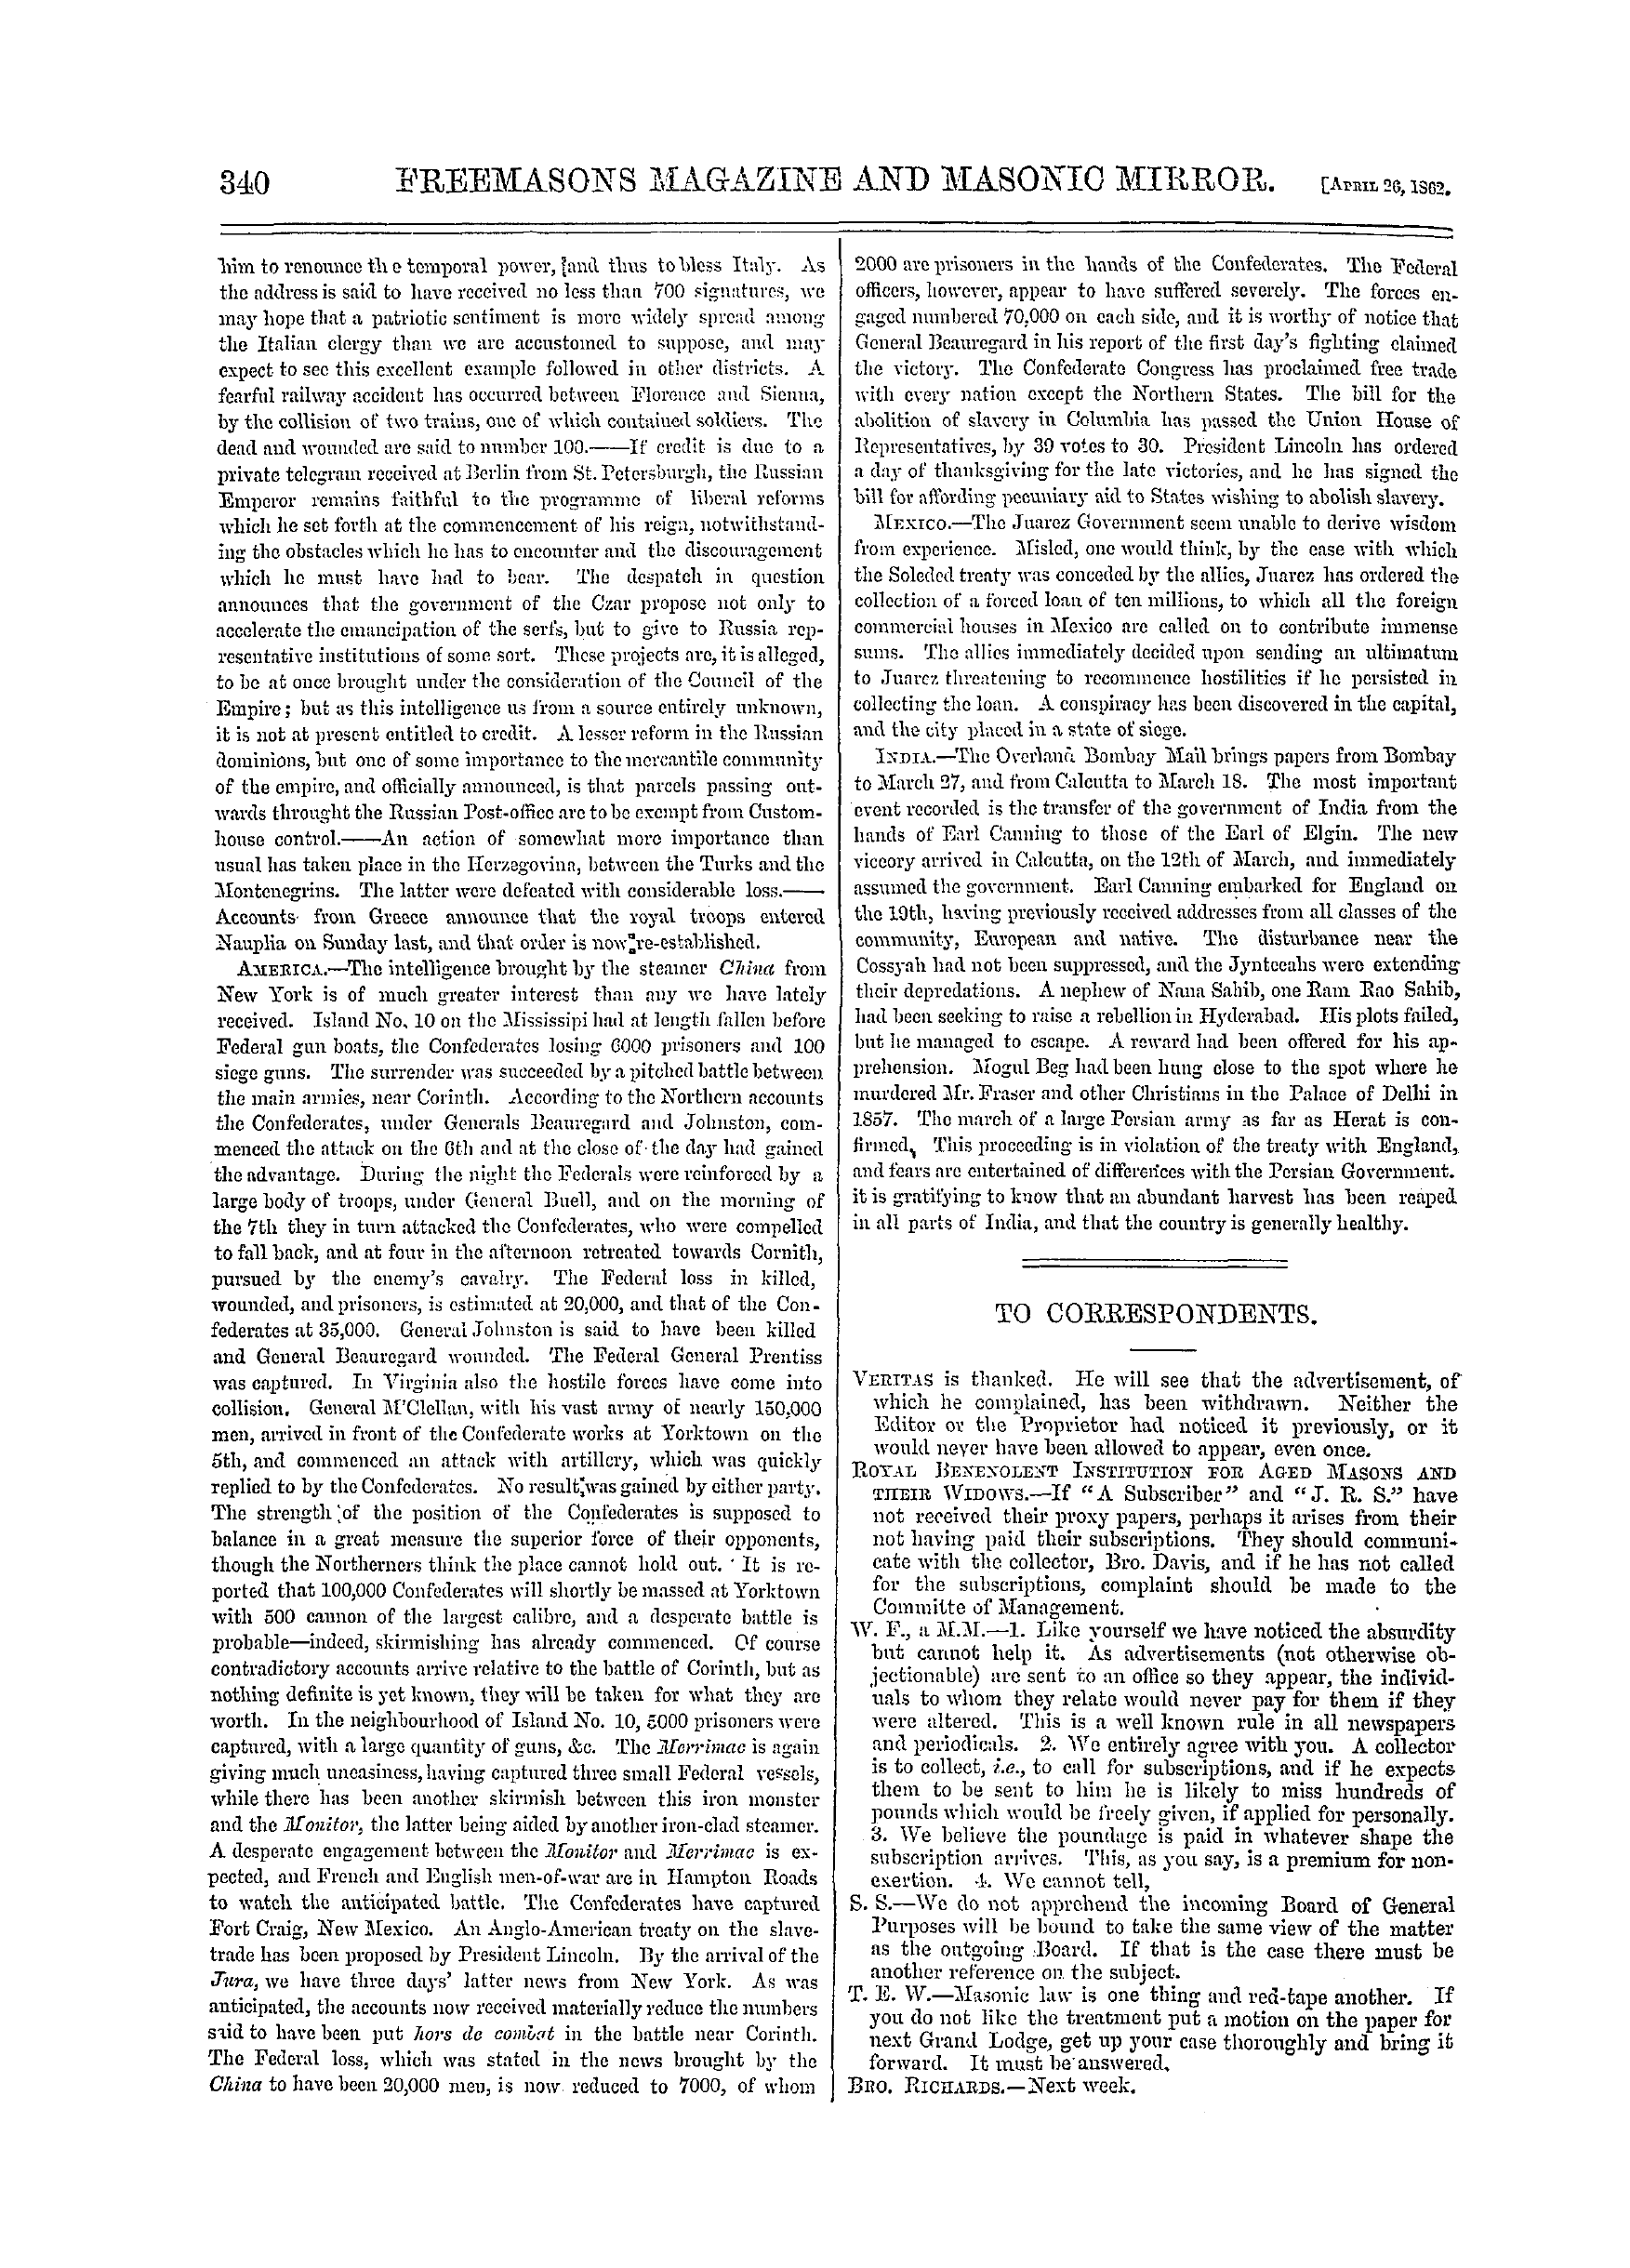 Page 20